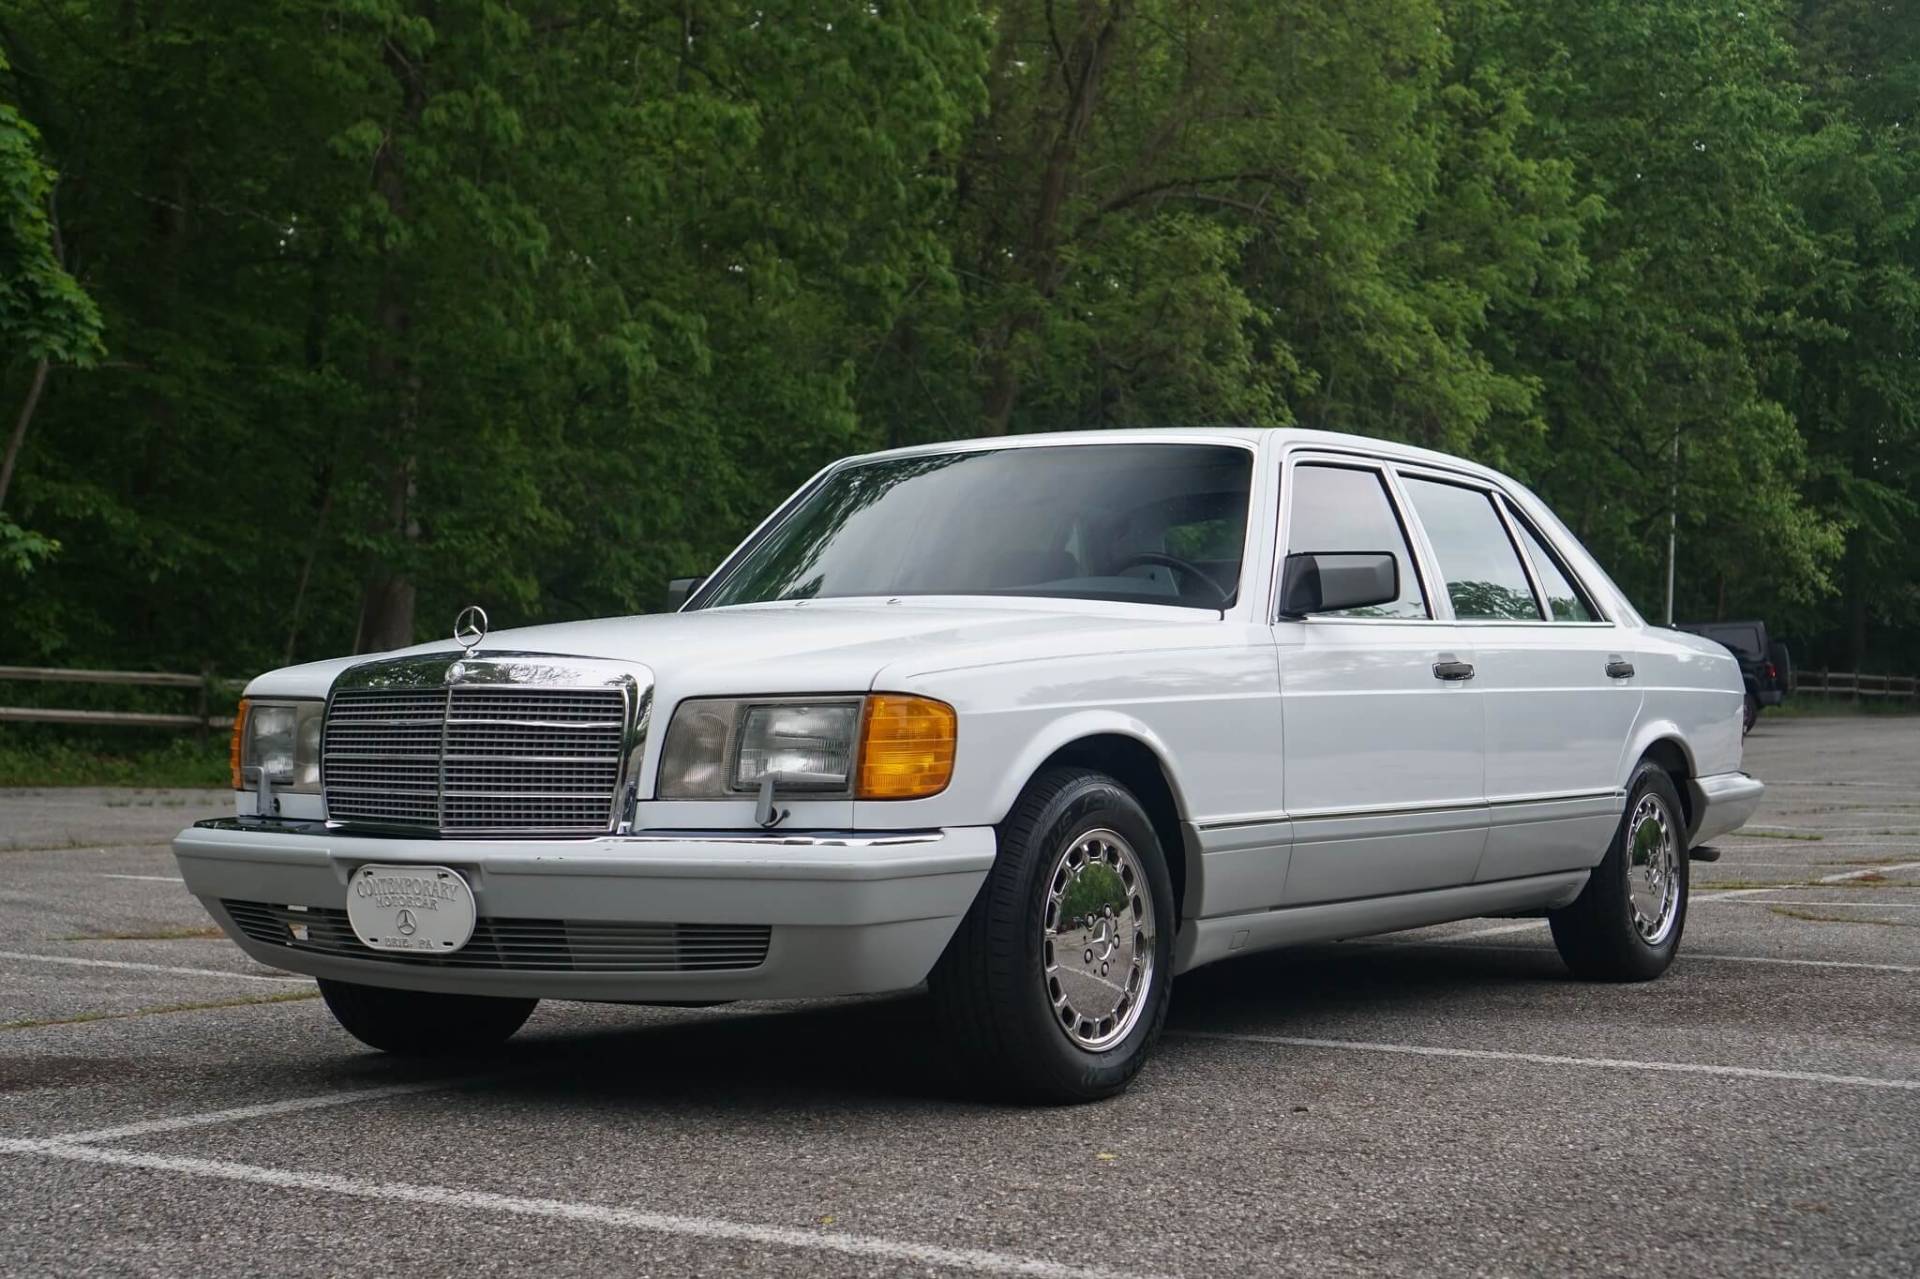 Used 1989 Mercedes-Benz 300-Class 300 SEL | Oyster Bay, NY